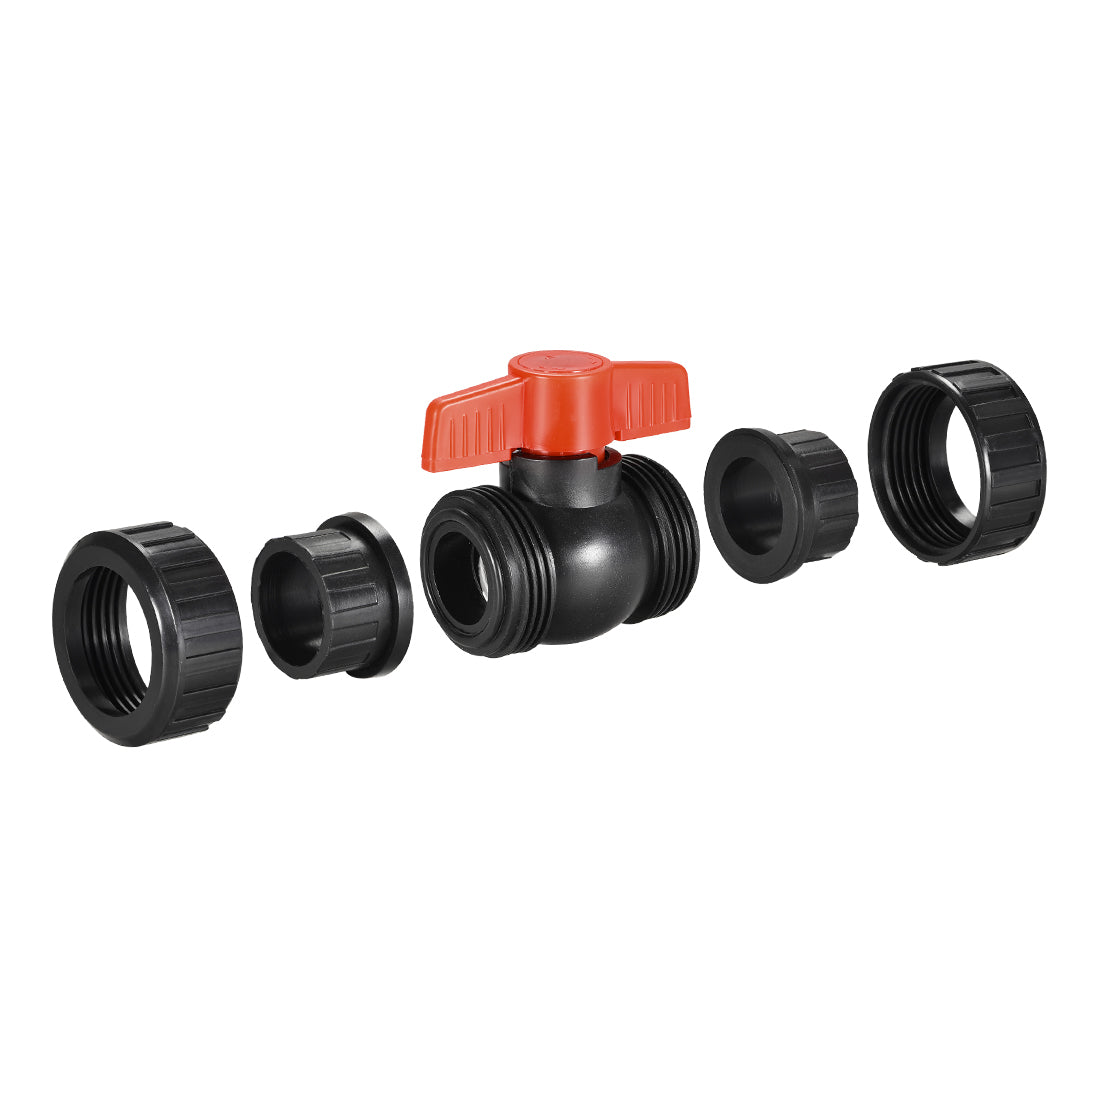 Uxcell Uxcell Double Union Ball Valve, 48.5mm Inner Diameter, Socket Type, for Control Water Flow, PE Black Red